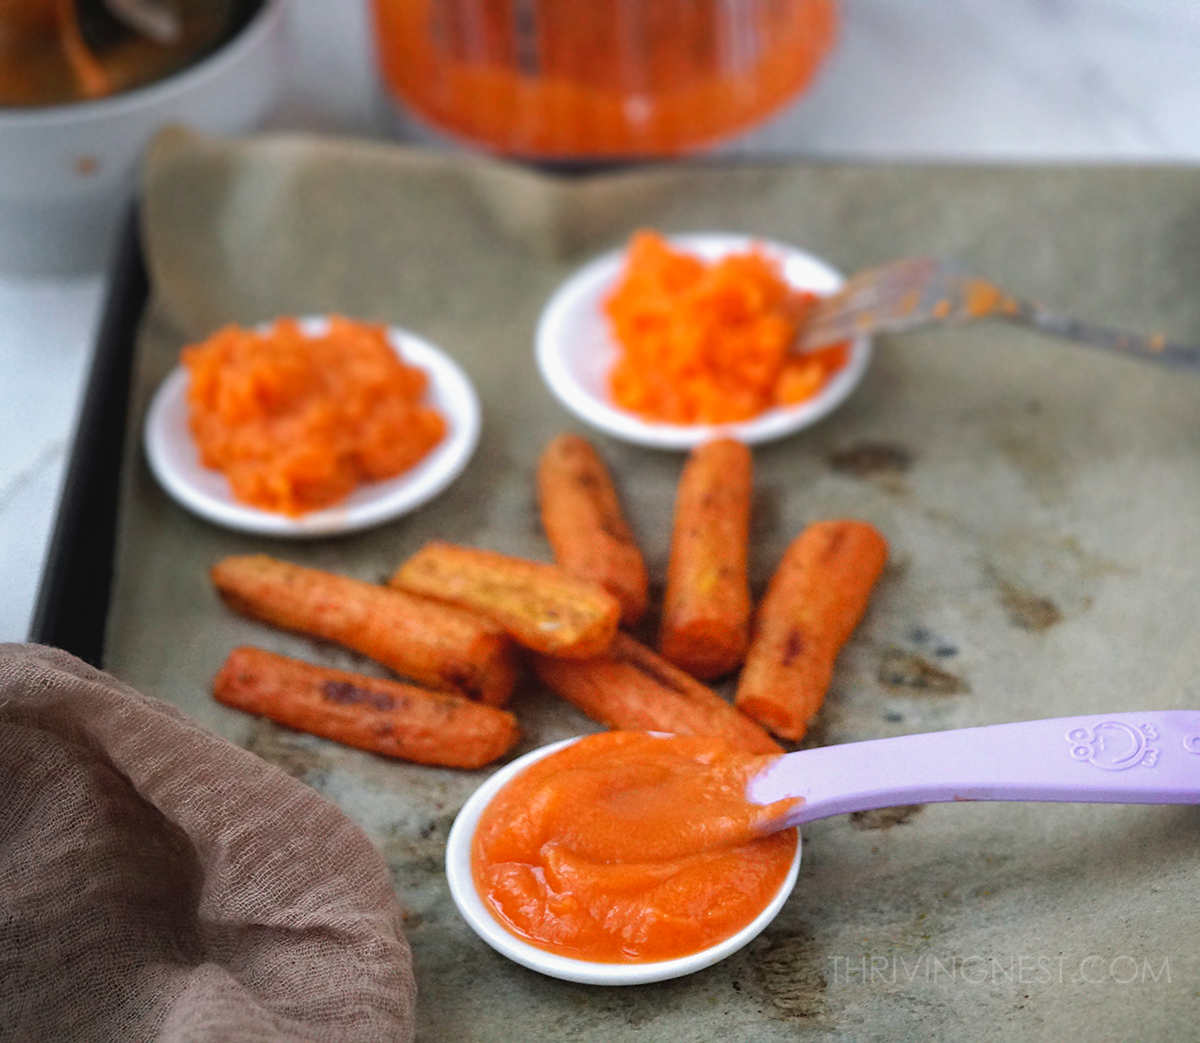 Ways to prepare and cook carrots for baby: mashed carrots, thick carrot puree and thin smooth carrot puree for younger babies. Roasted carrot sticks as baby finger food.